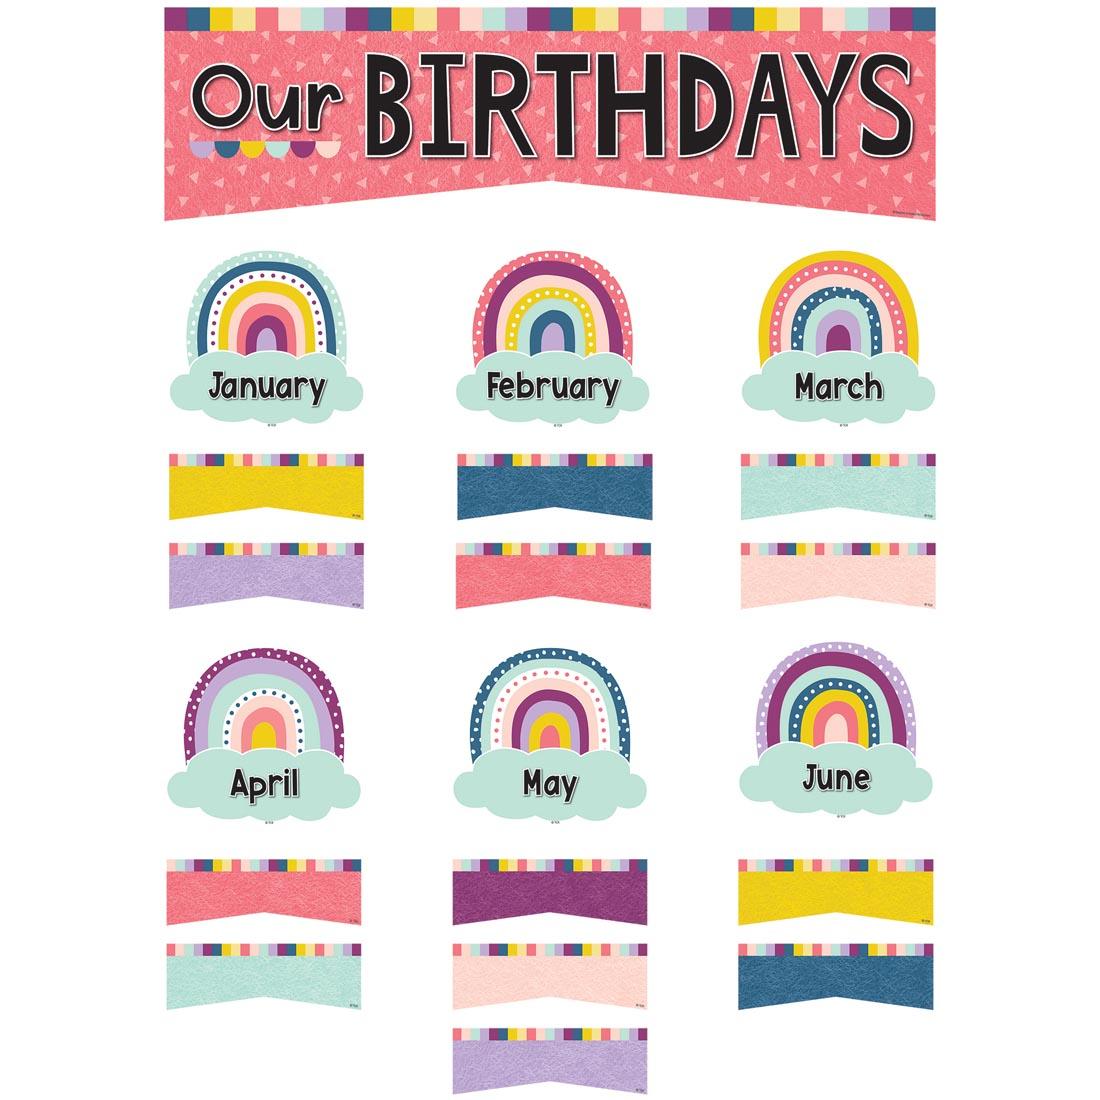 Our Birthdays Mini Bulletin Board Set from the Oh Happy Day collection by Teacher Created Resources